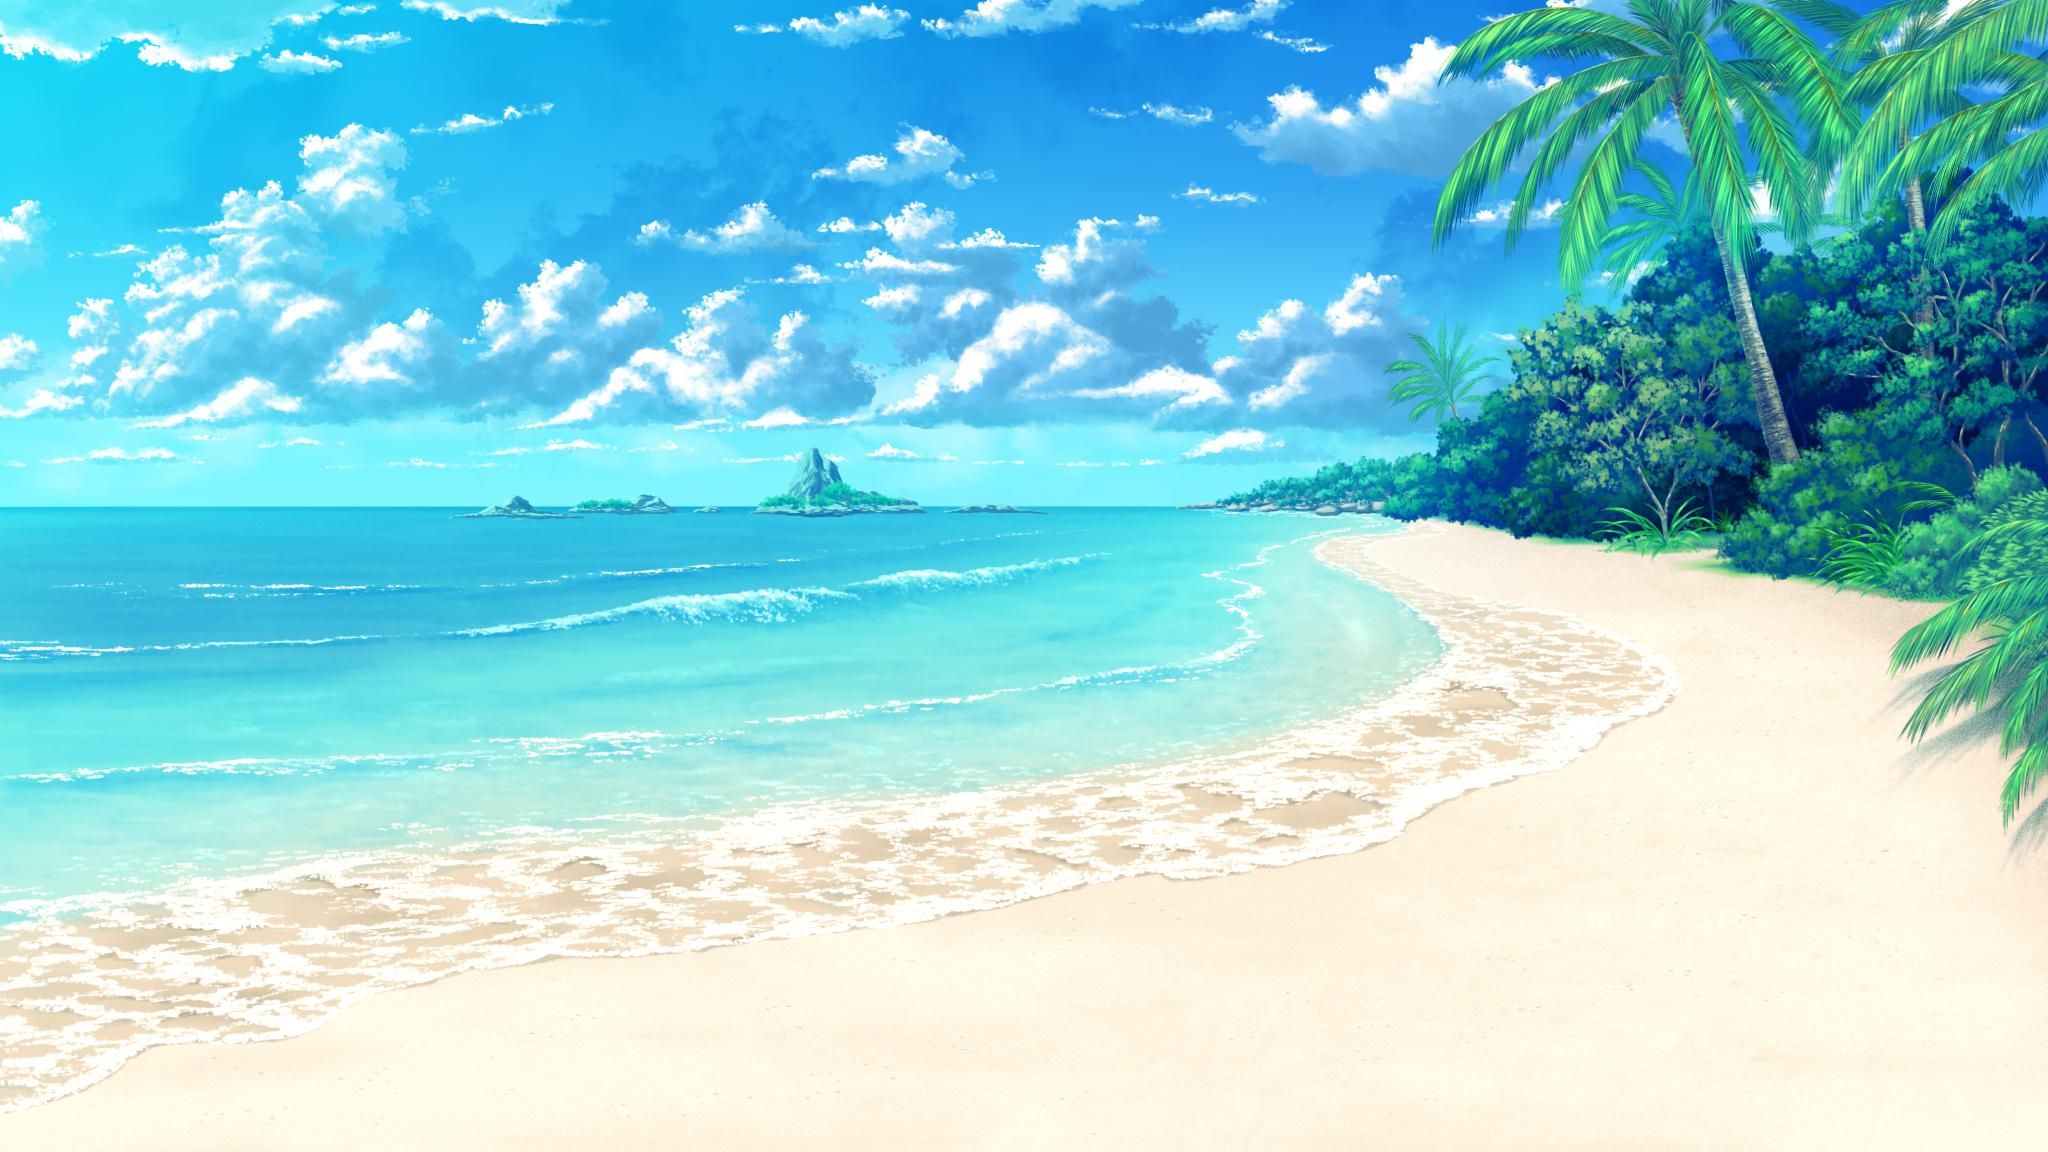 Beach Anime Backgrounds Images - Free Download on Freepik